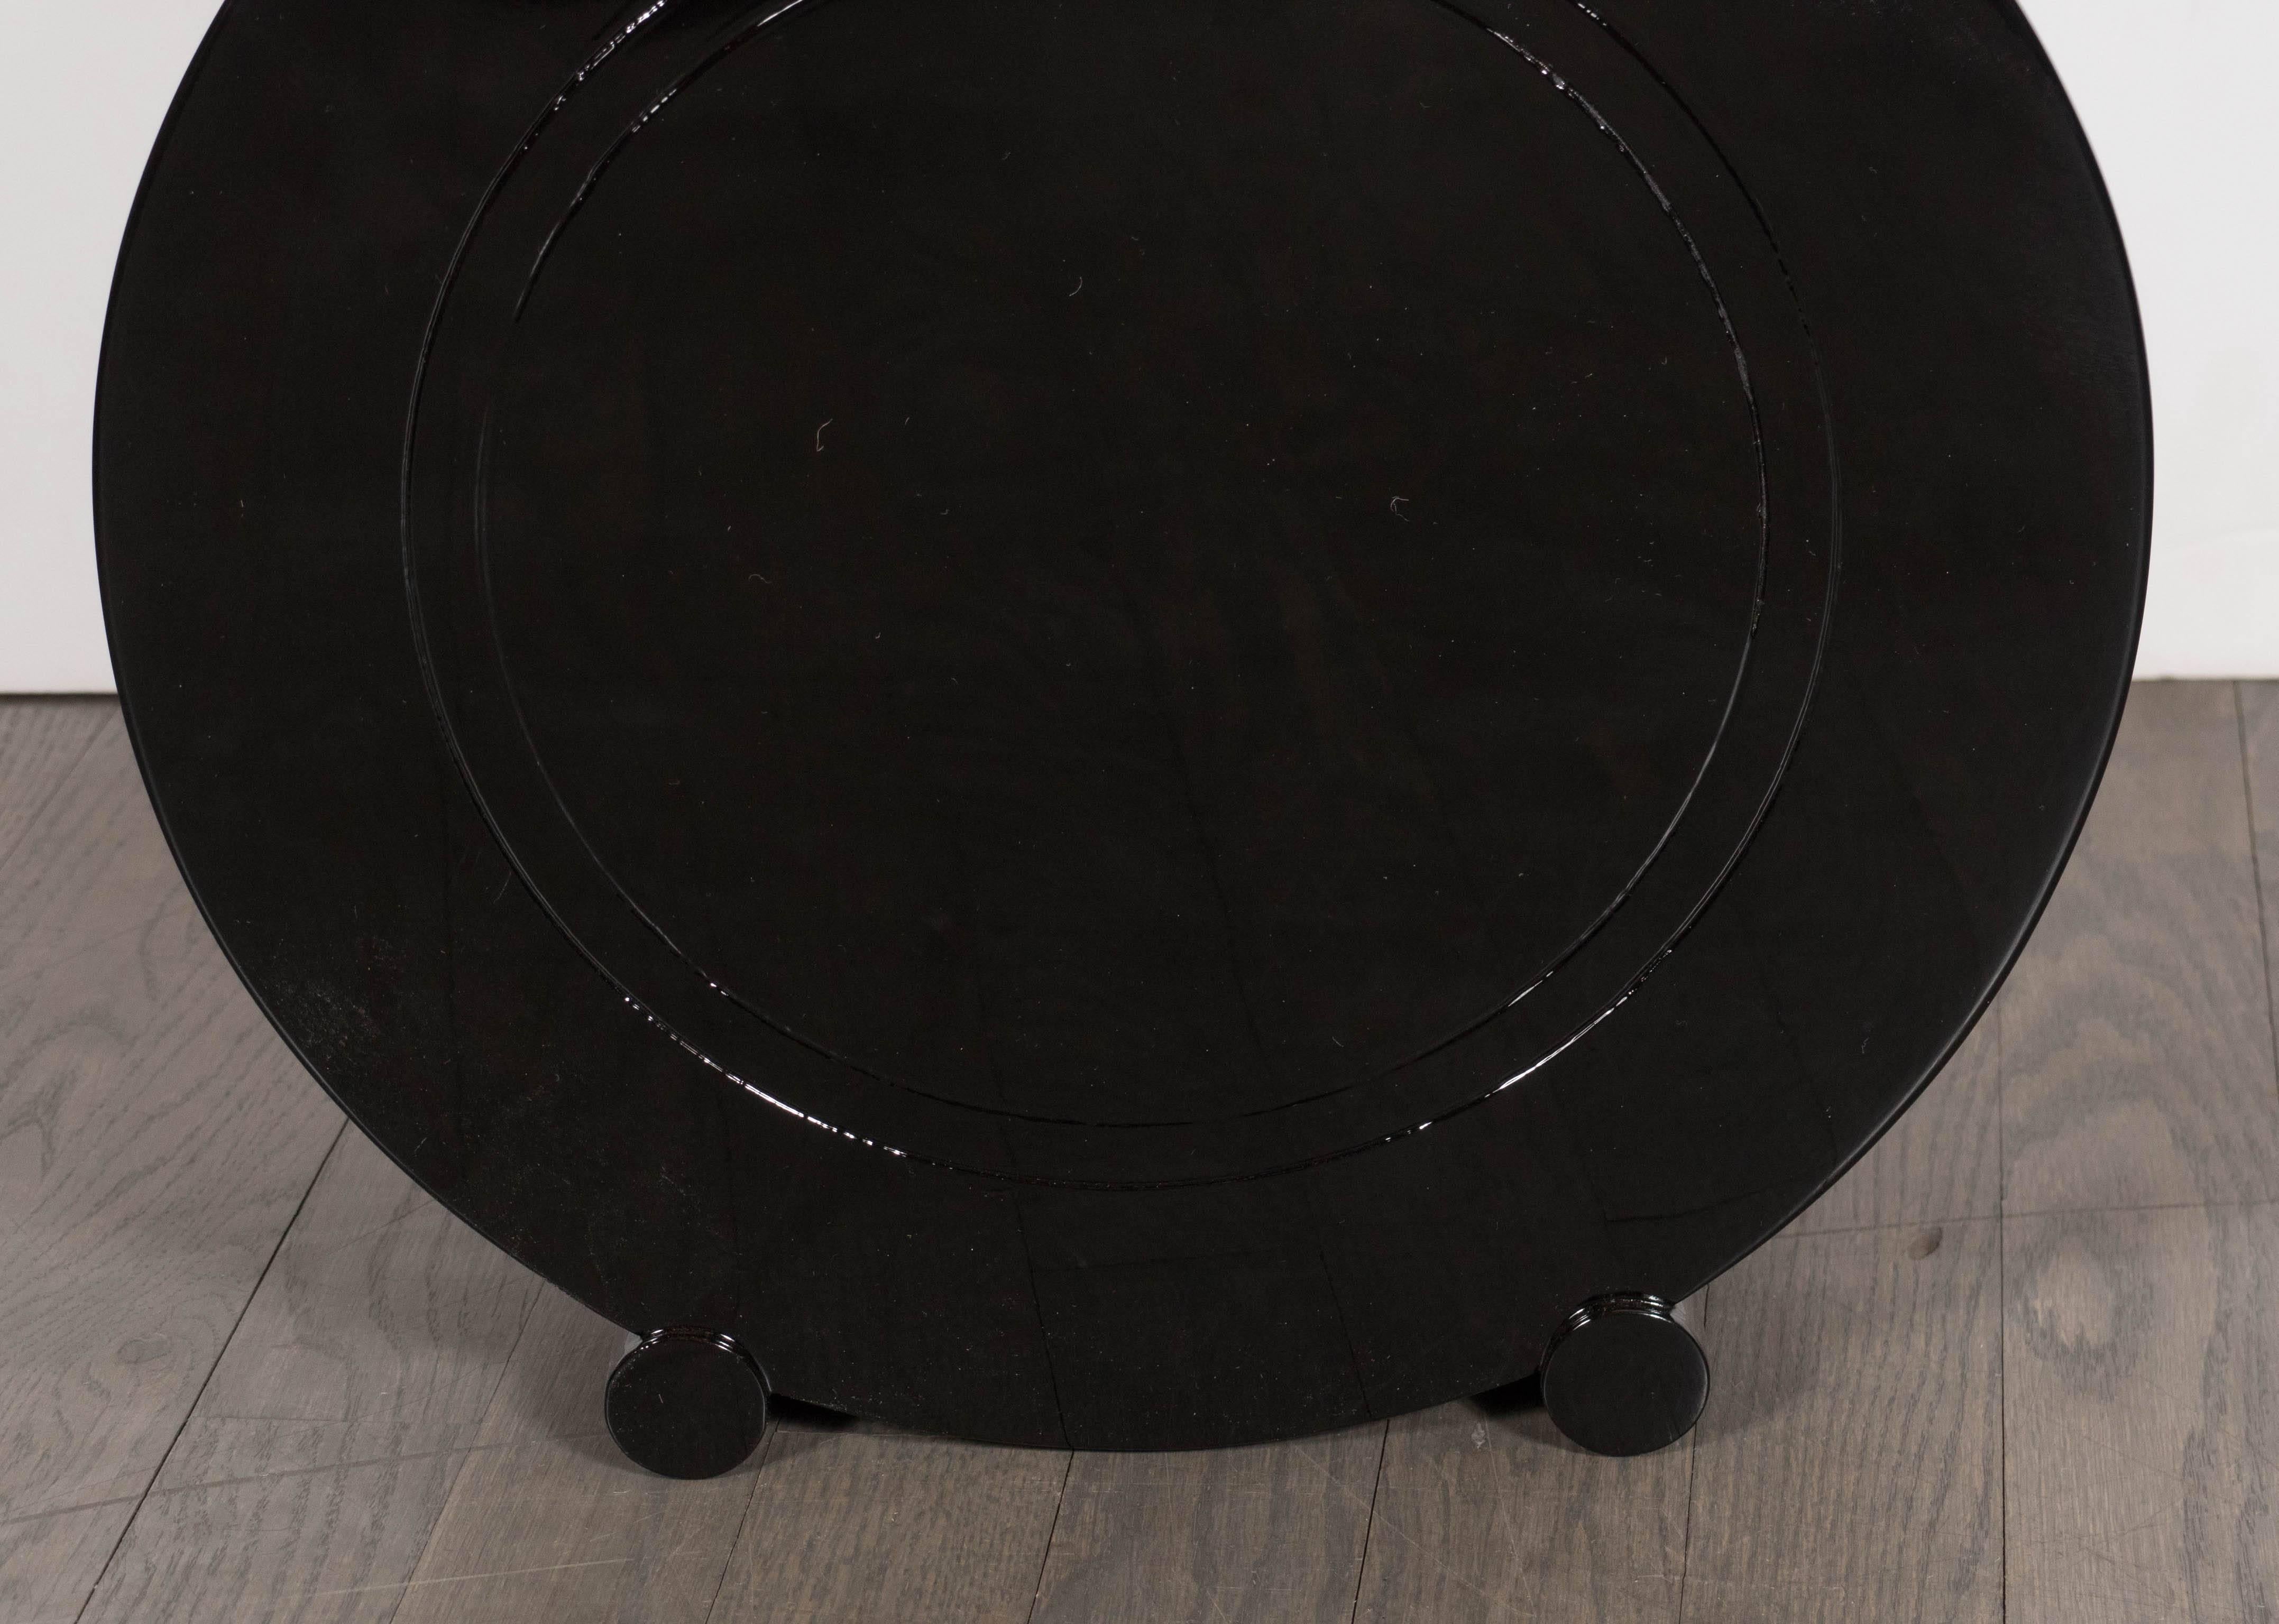 American Art Deco Machine Age Waste Basket Attributed to Donald Deskey in Black Lacquer